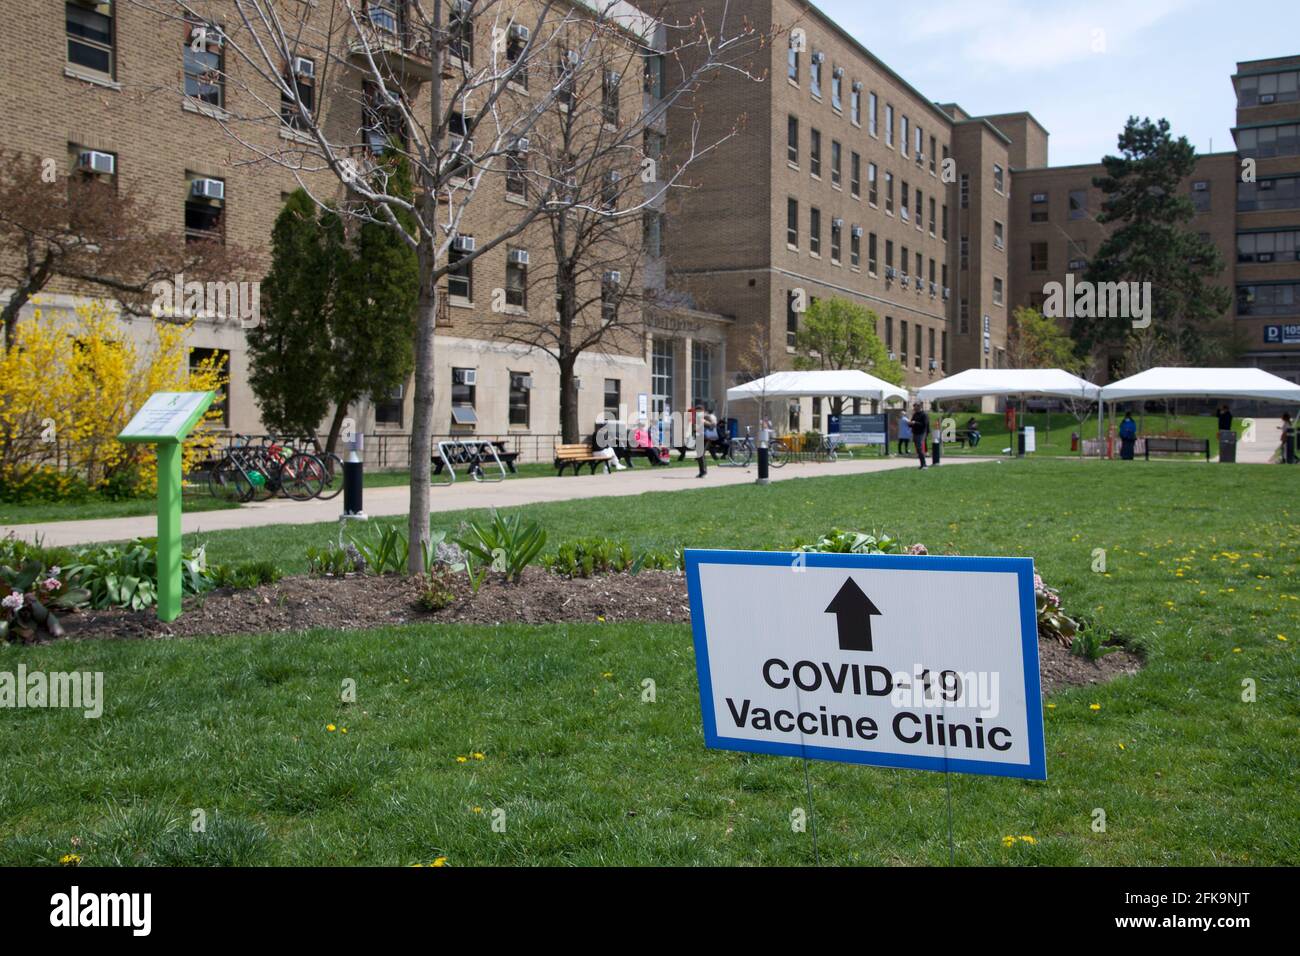 Toronto, Ontario, Canada - 27th April 2021: A direction sign was put up to show the entrance of the COVID-19 Vaccination Clinic ( Sunnybrook Hospital ) in Toronto, Canada. Stock Photo